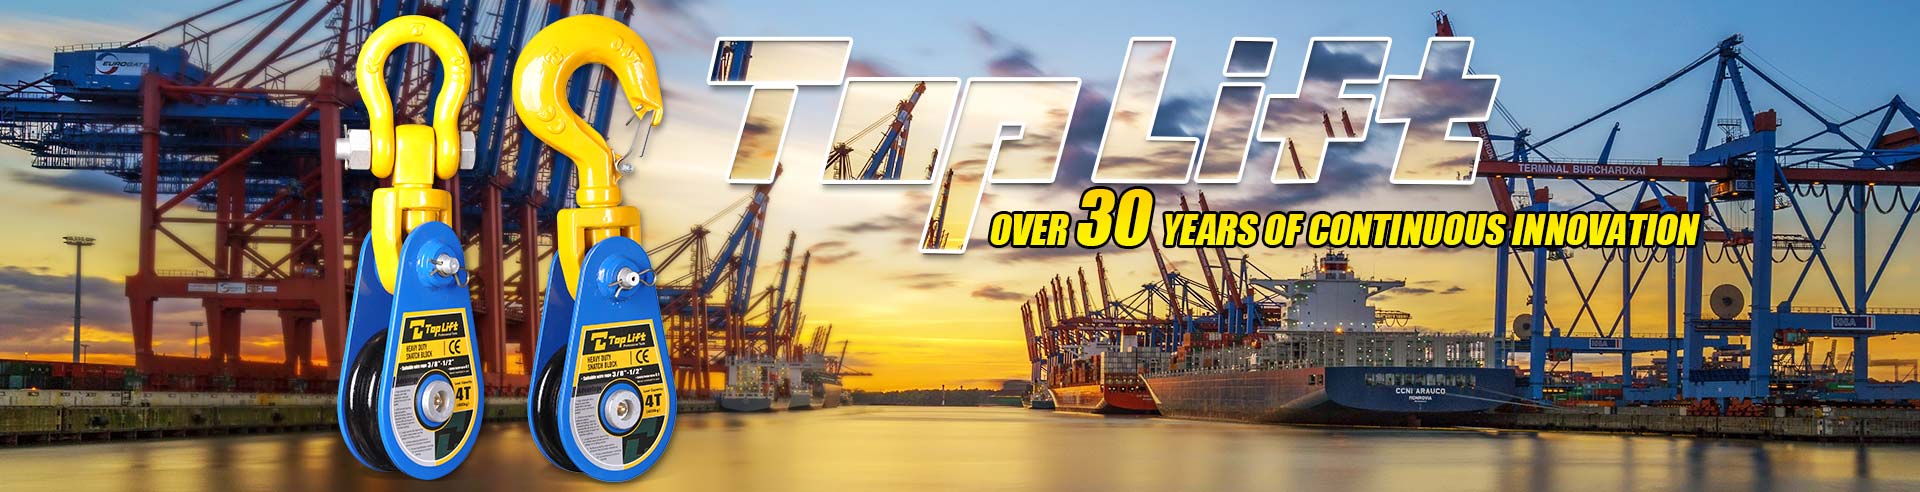 Top Lift Over 30 Years of Continuous Innovation